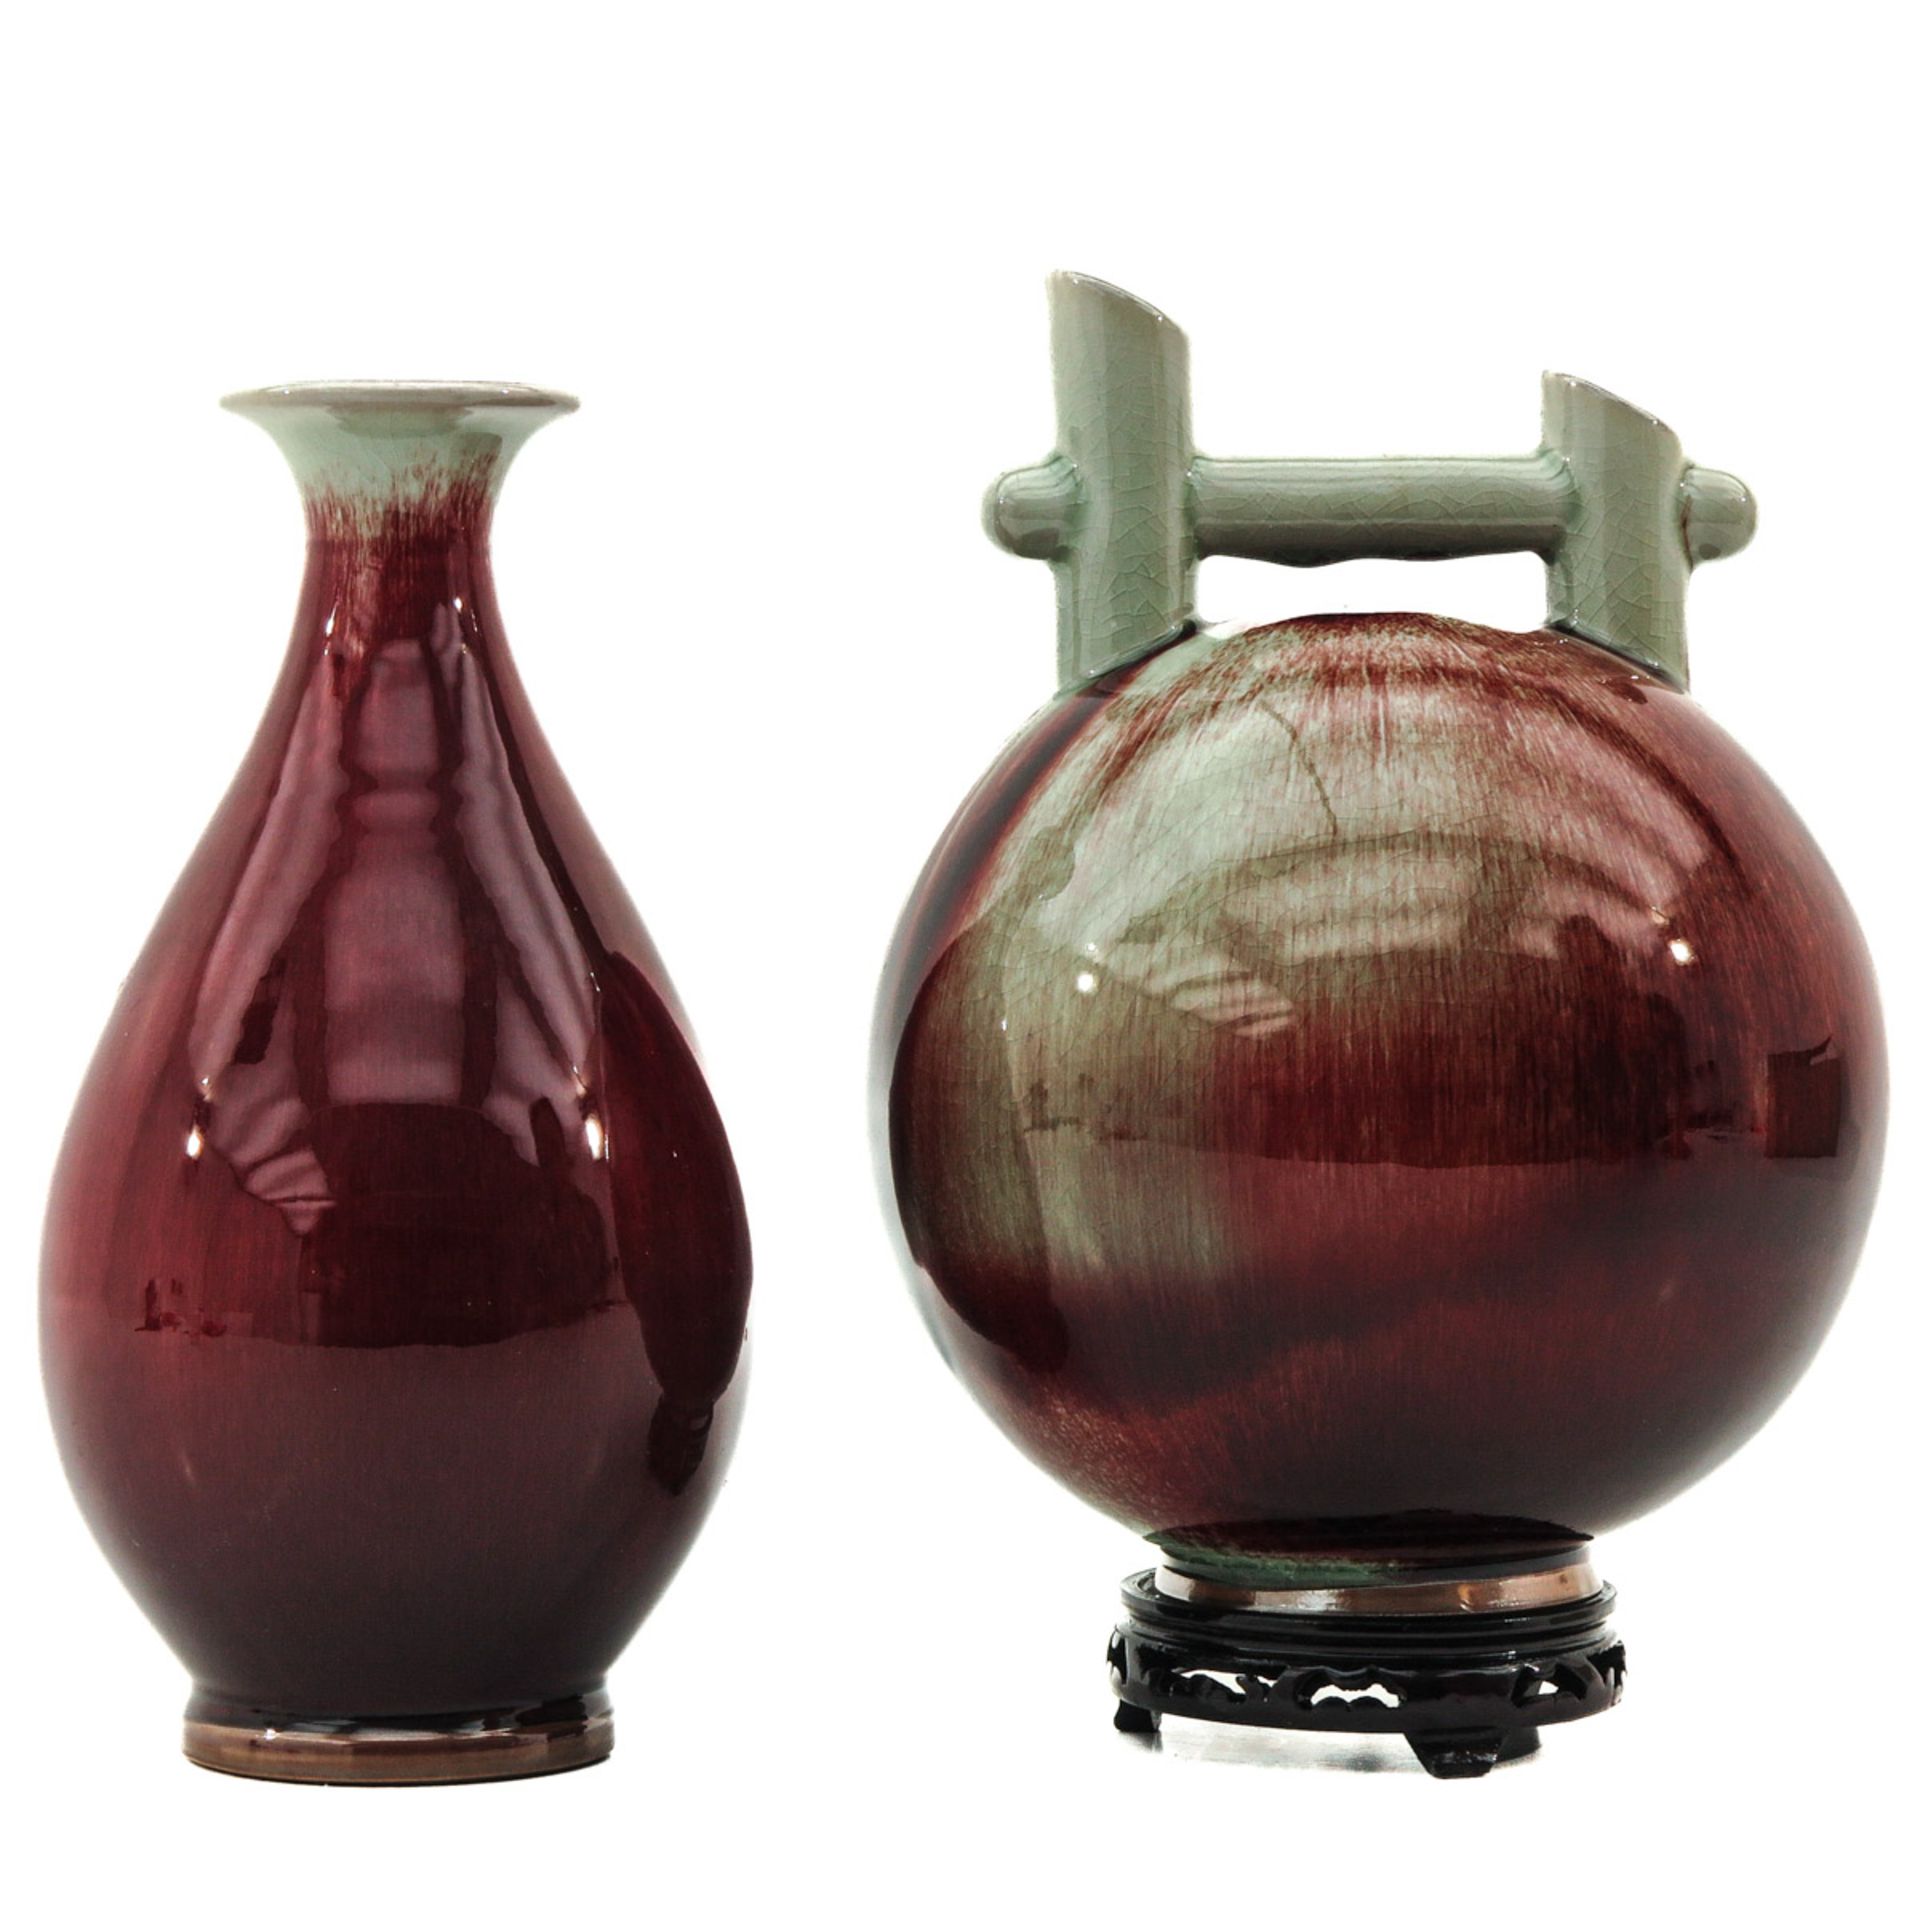 A Lot of 2 Jun Ware Vases - Image 3 of 6